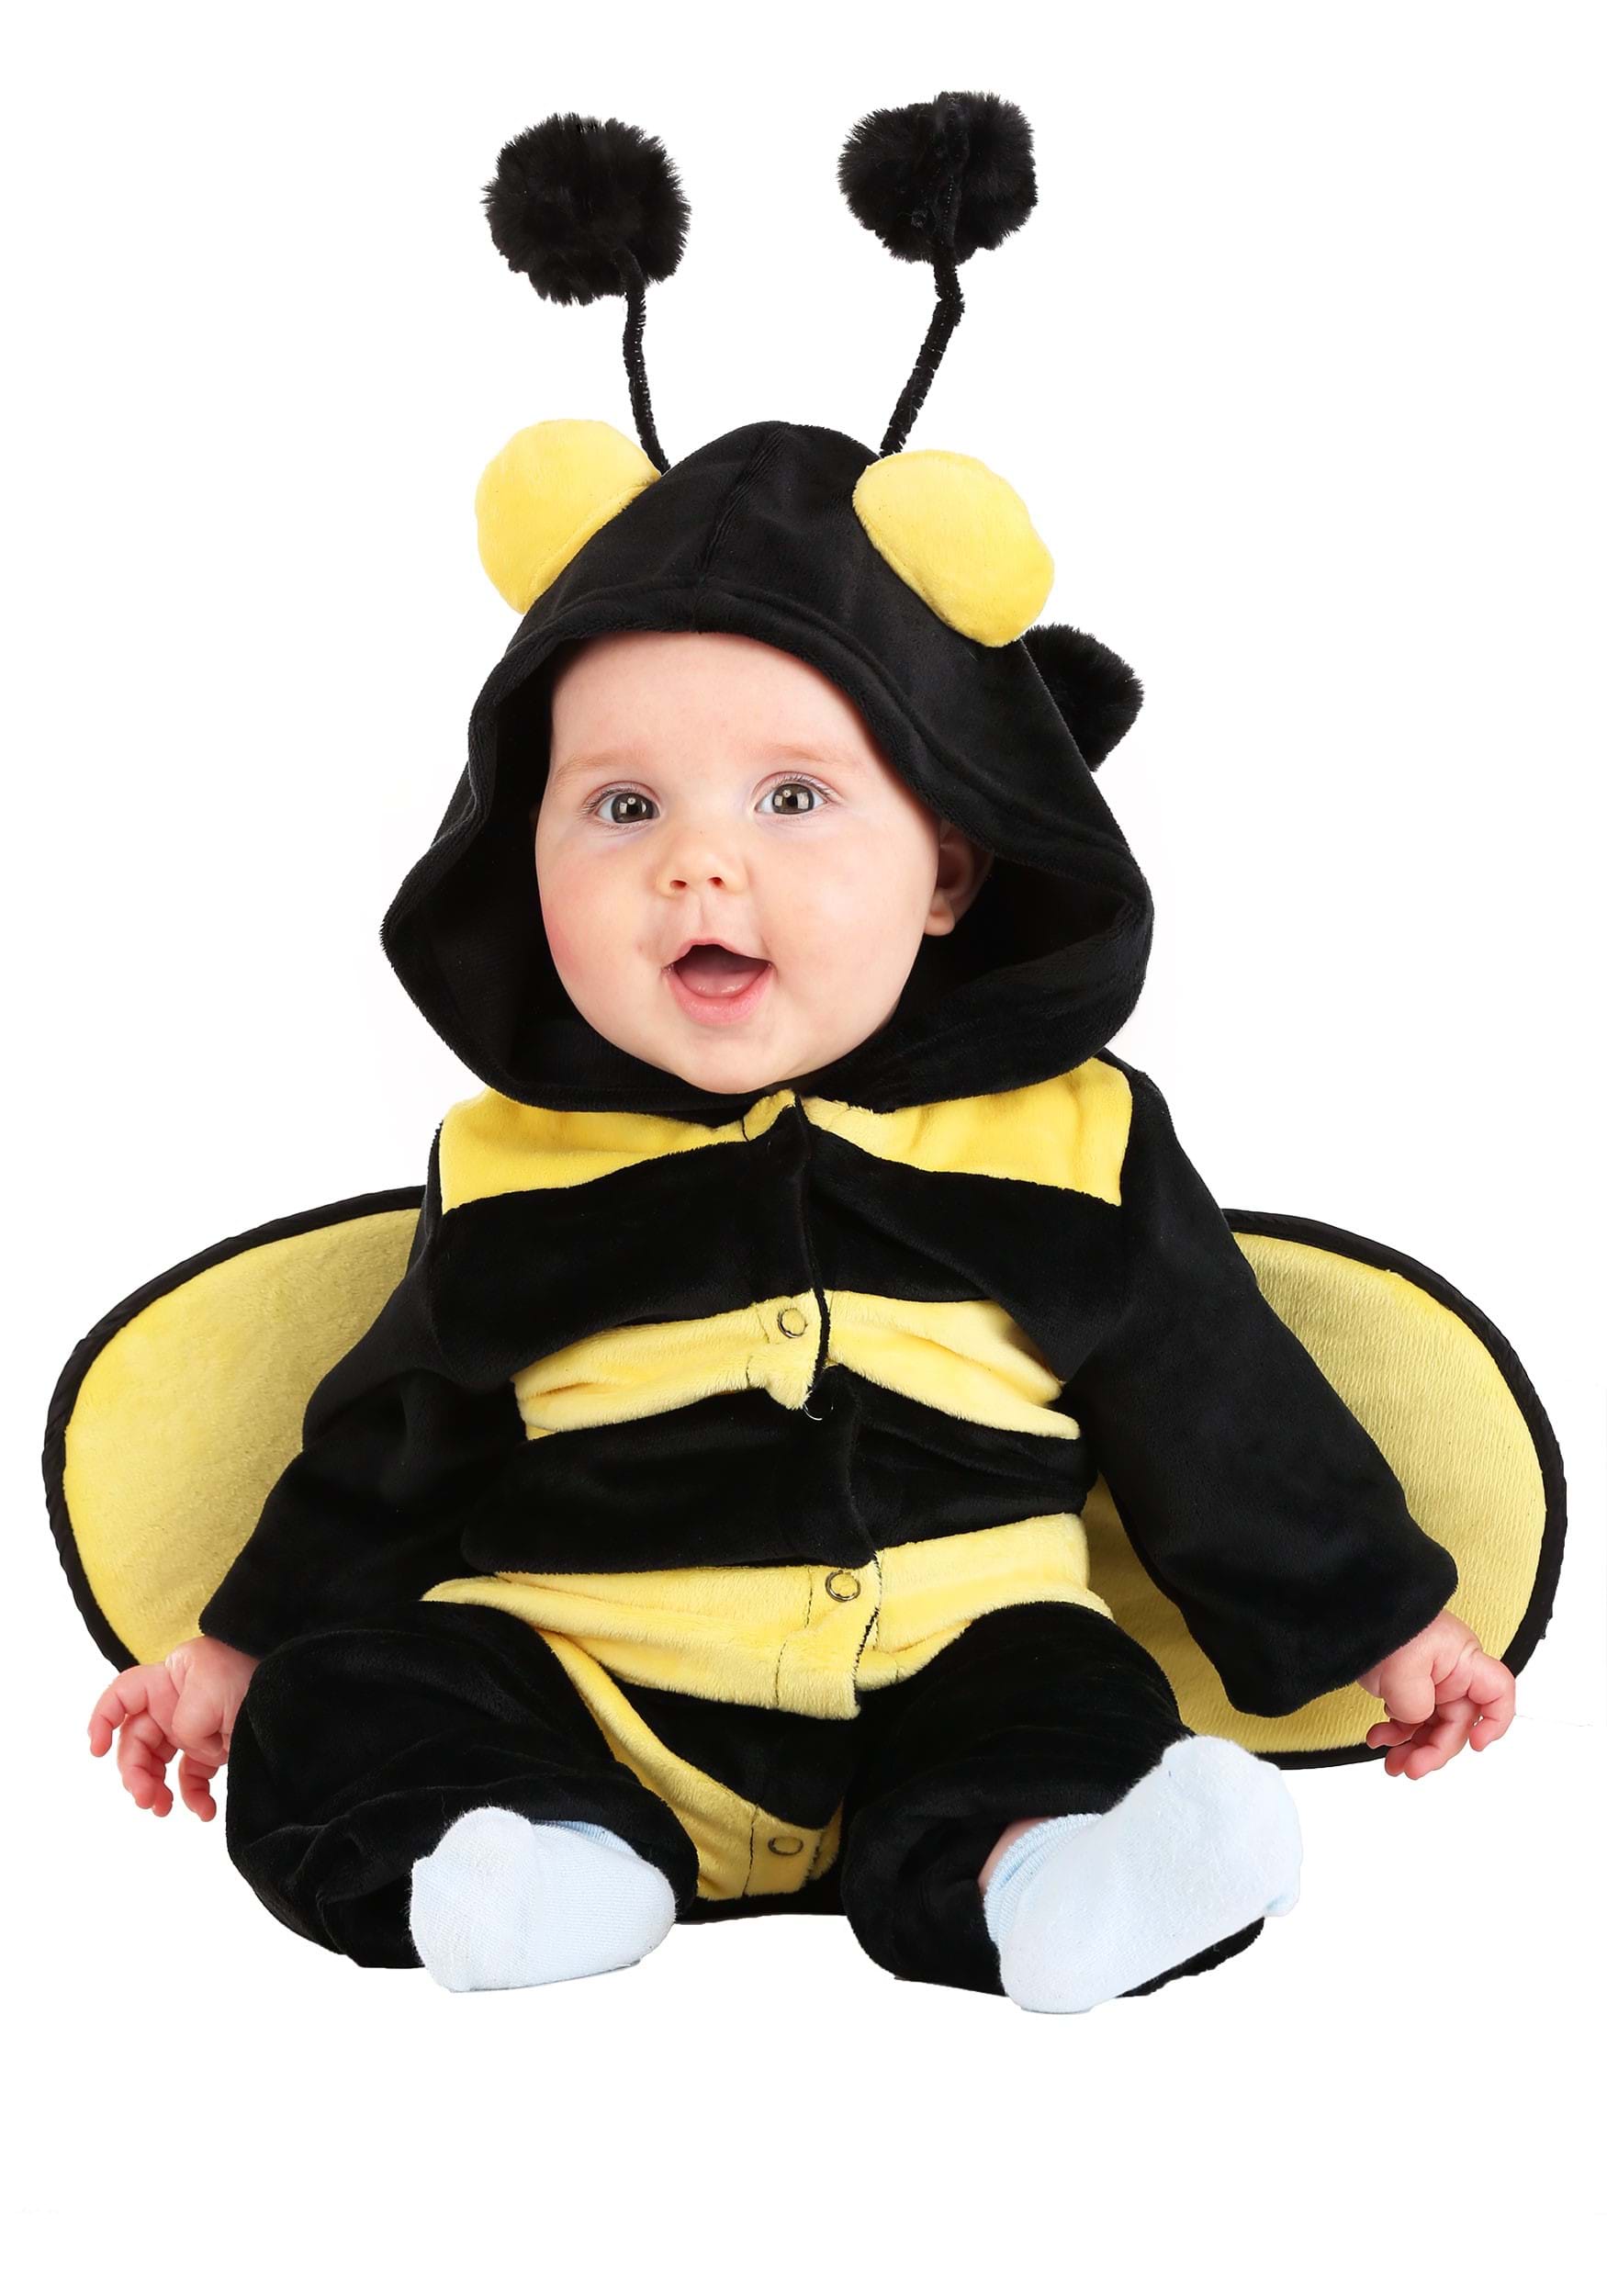 Buzzing Bumble Bee Costume for Infants